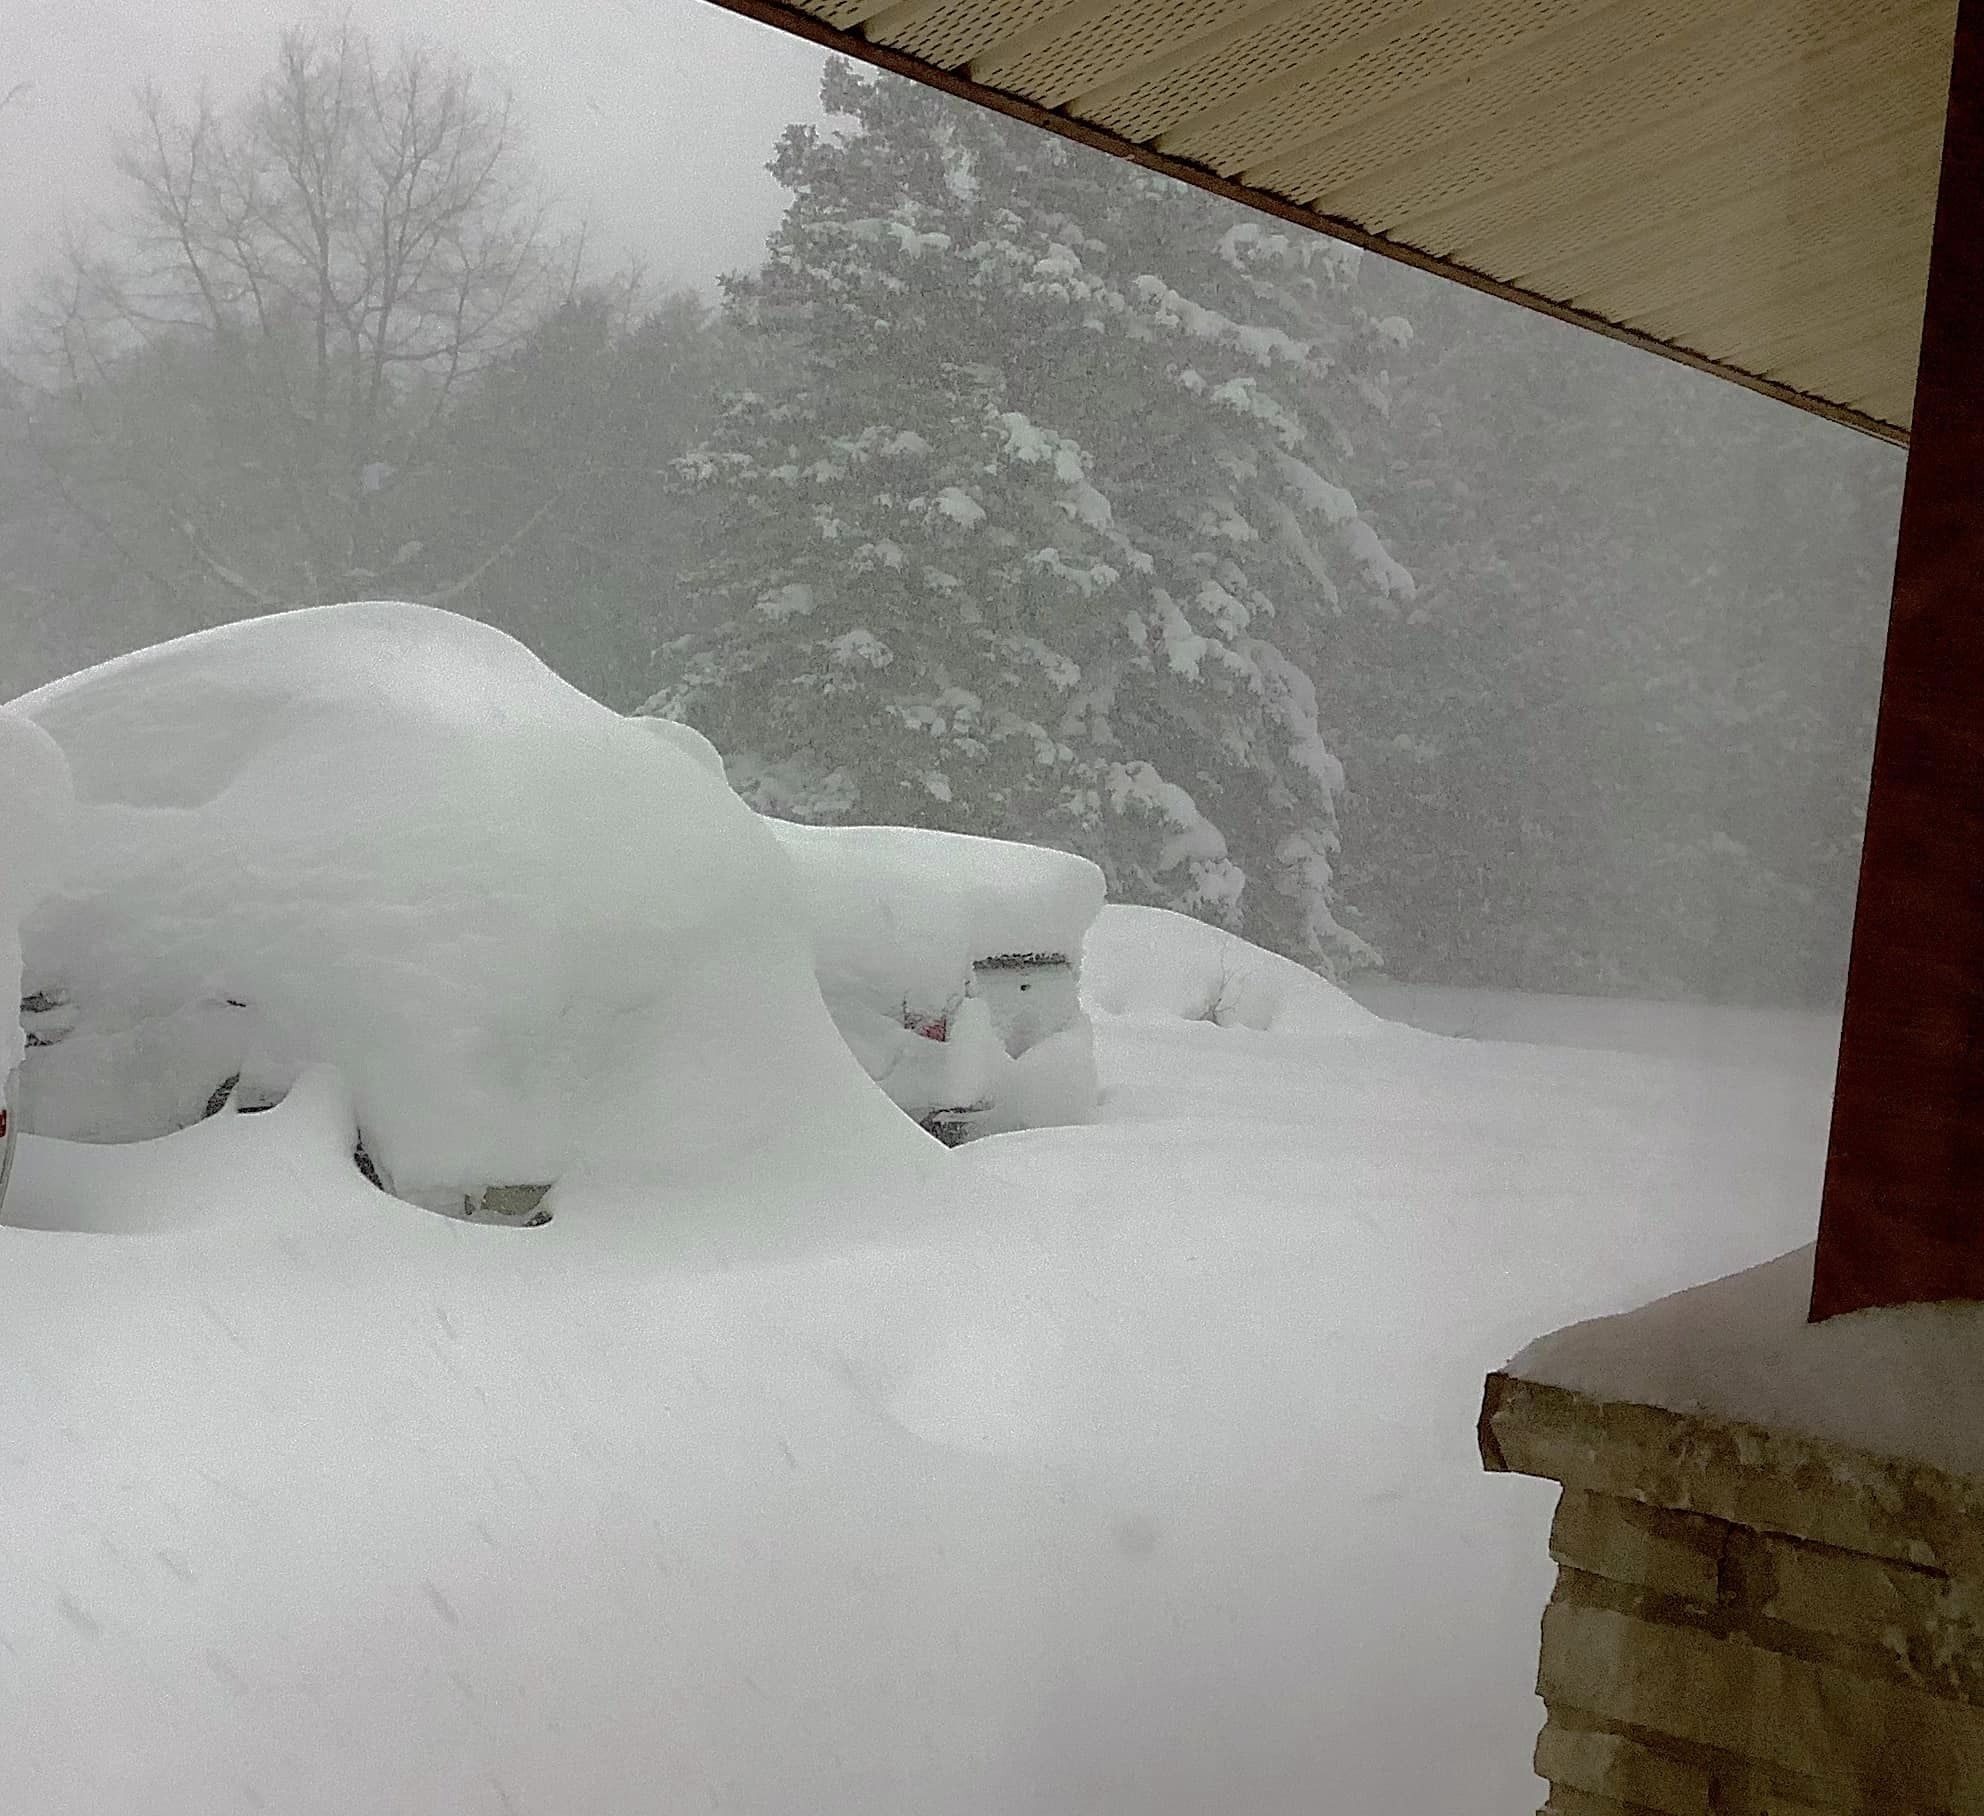 Wiarton saw over 120 centimetres of snow during a multi-day squall event from Nov. 17-20, 2022.